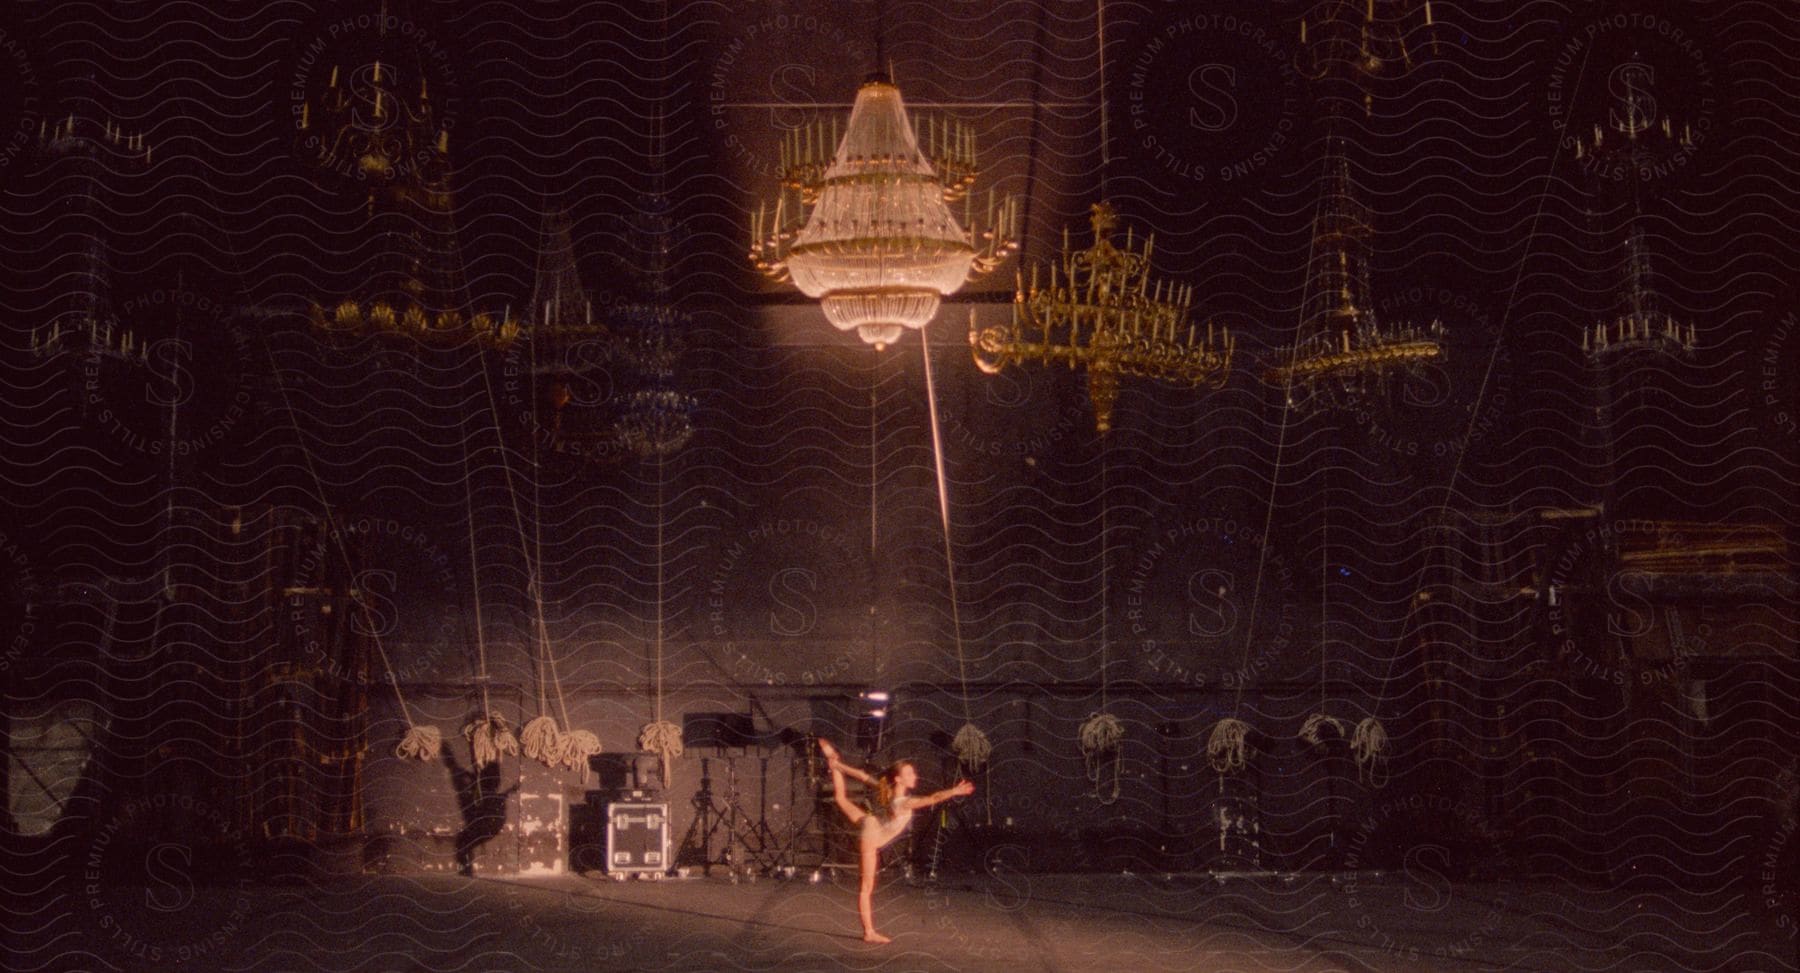 A ballet dancer rehearses a move on an empty stage